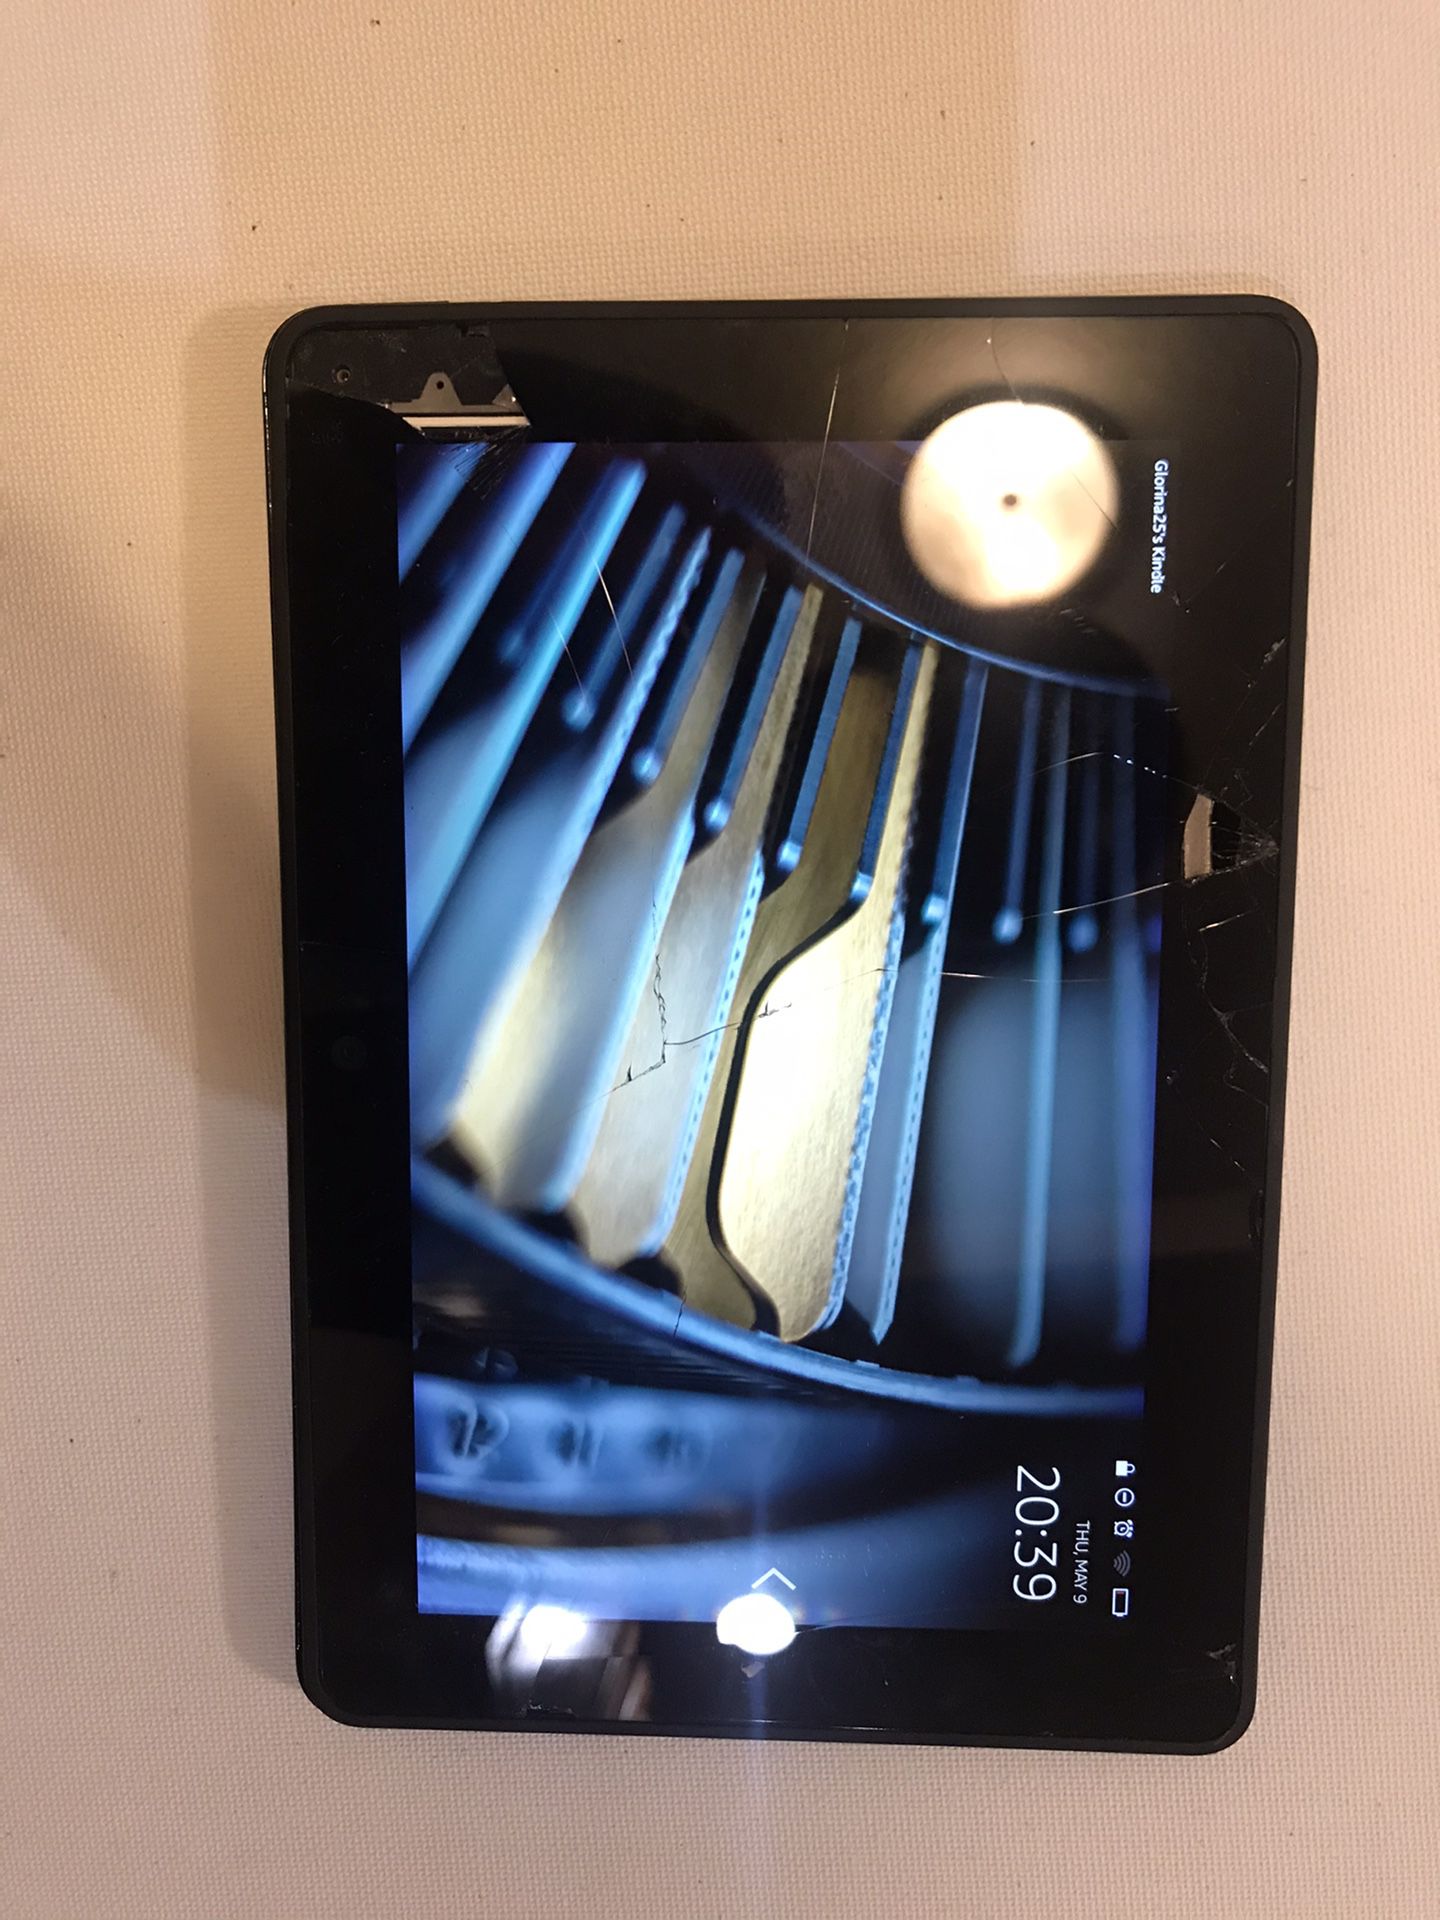 Cracked screen Kindle Fire HDX (3rd Generation)